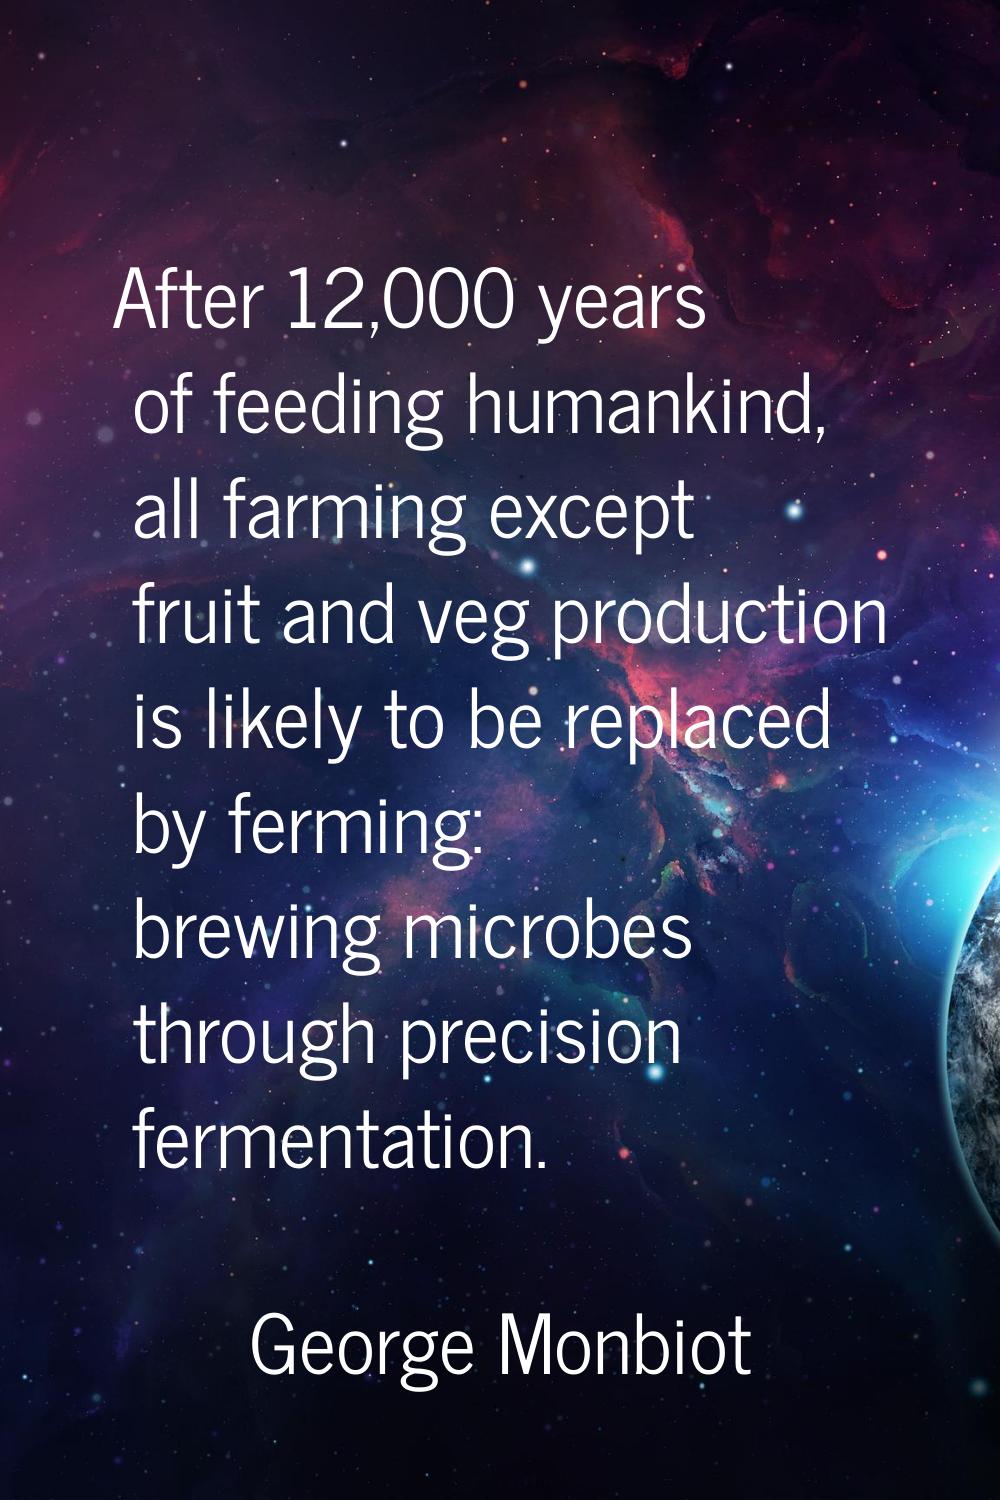 After 12,000 years of feeding humankind, all farming except fruit and veg production is likely to b